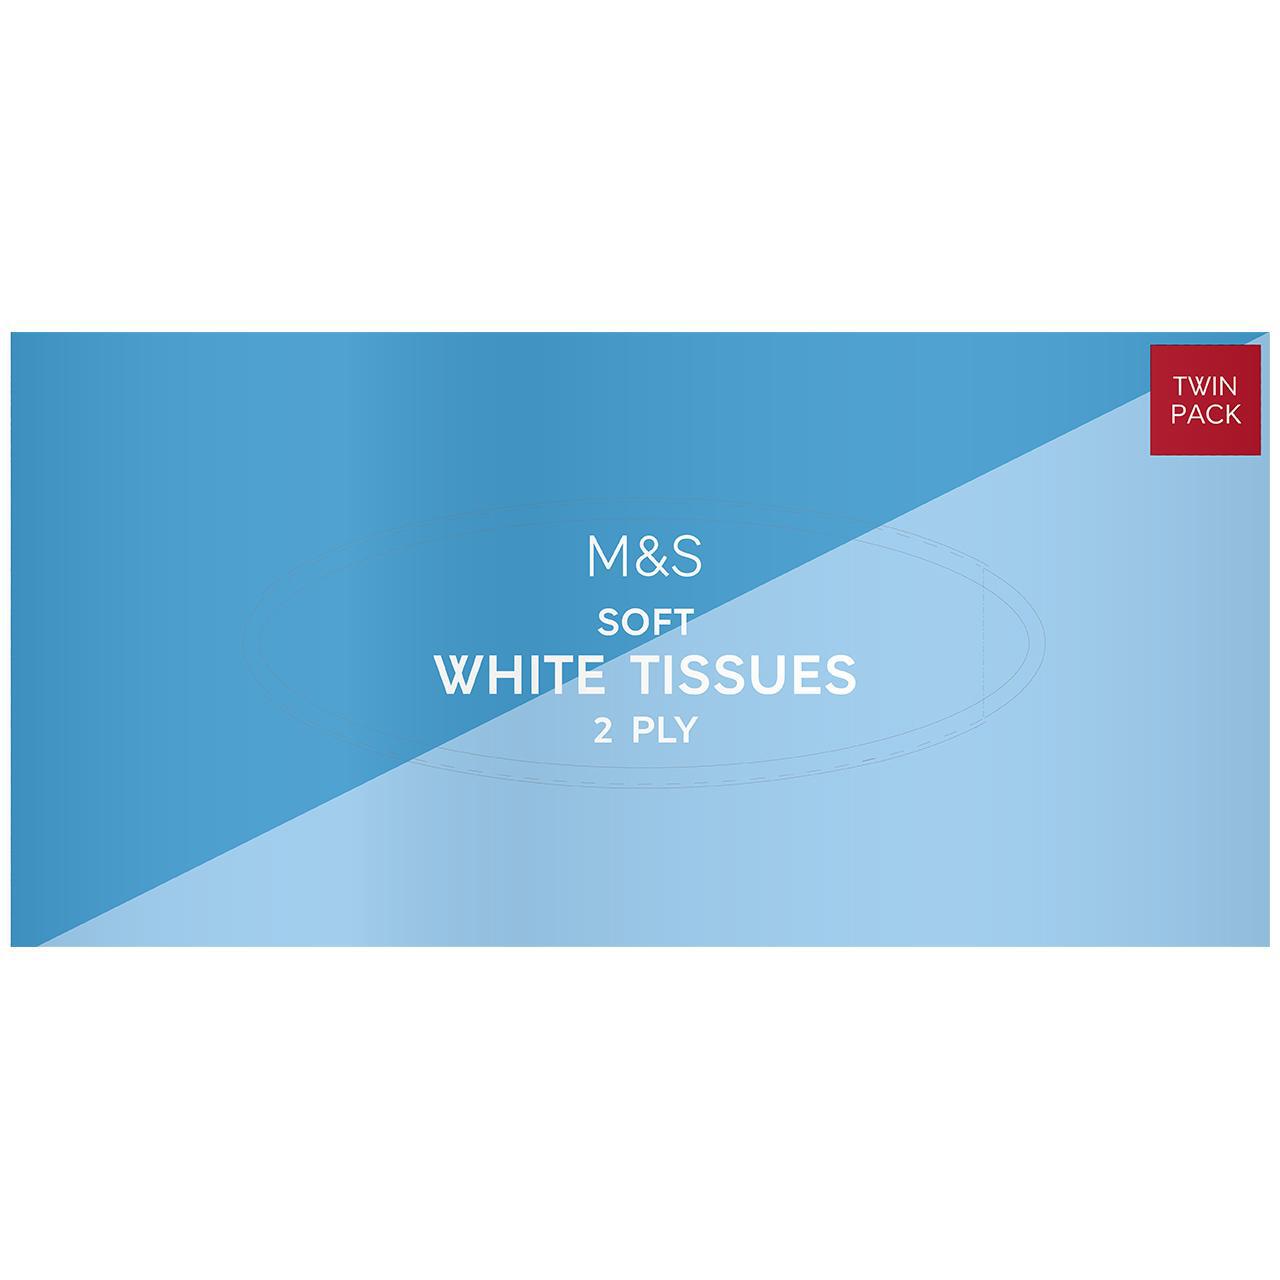 M&S Soft White Tissues Twin Pack 2 x 96 per pack